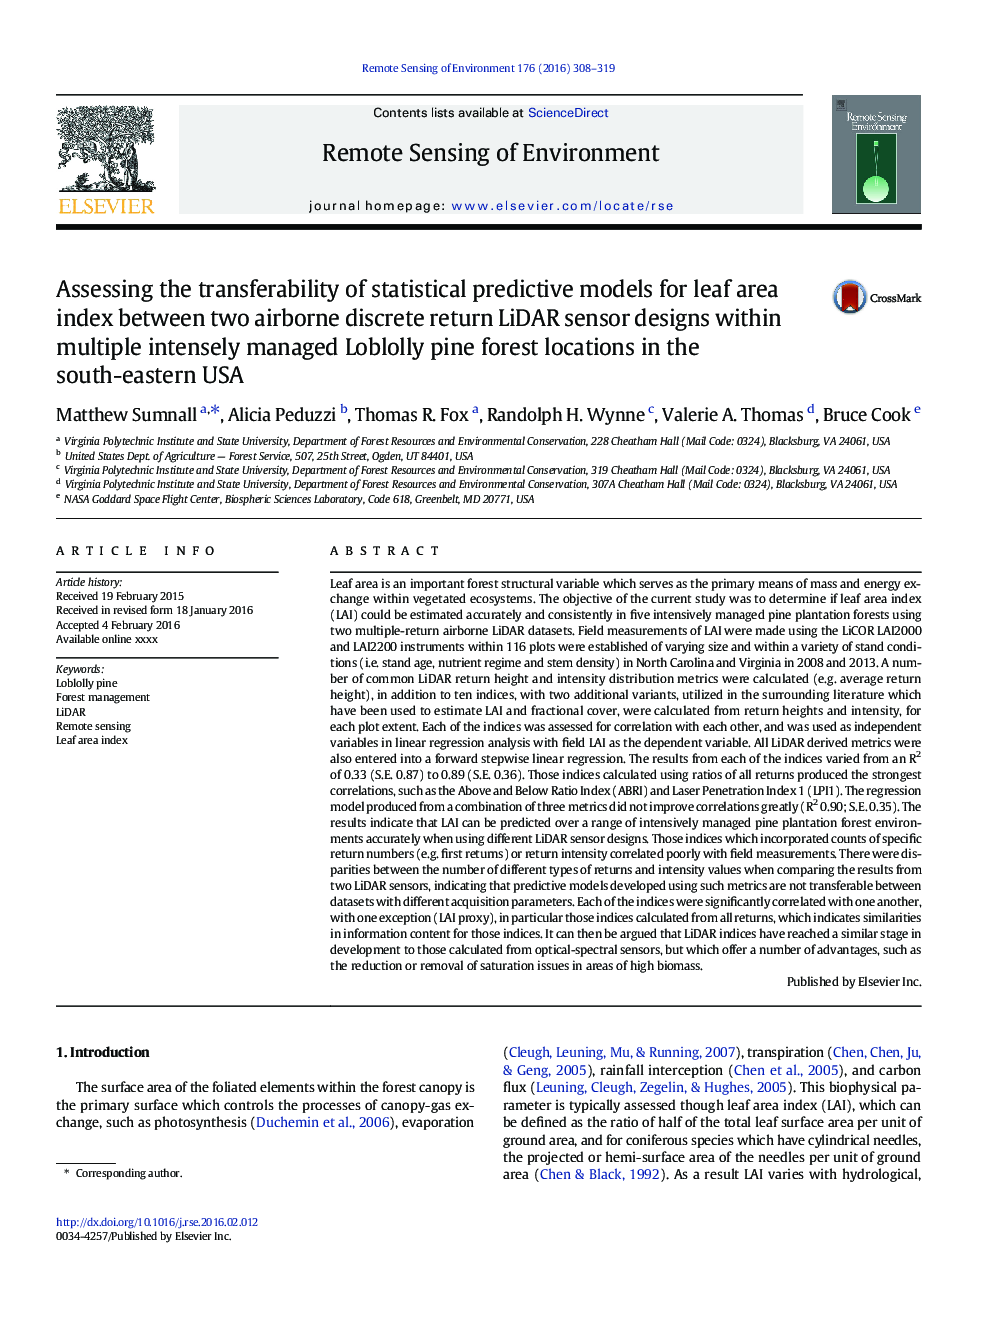 Assessing the transferability of statistical predictive models for leaf area index between two airborne discrete return LiDAR sensor designs within multiple intensely managed Loblolly pine forest locations in the south-eastern USA